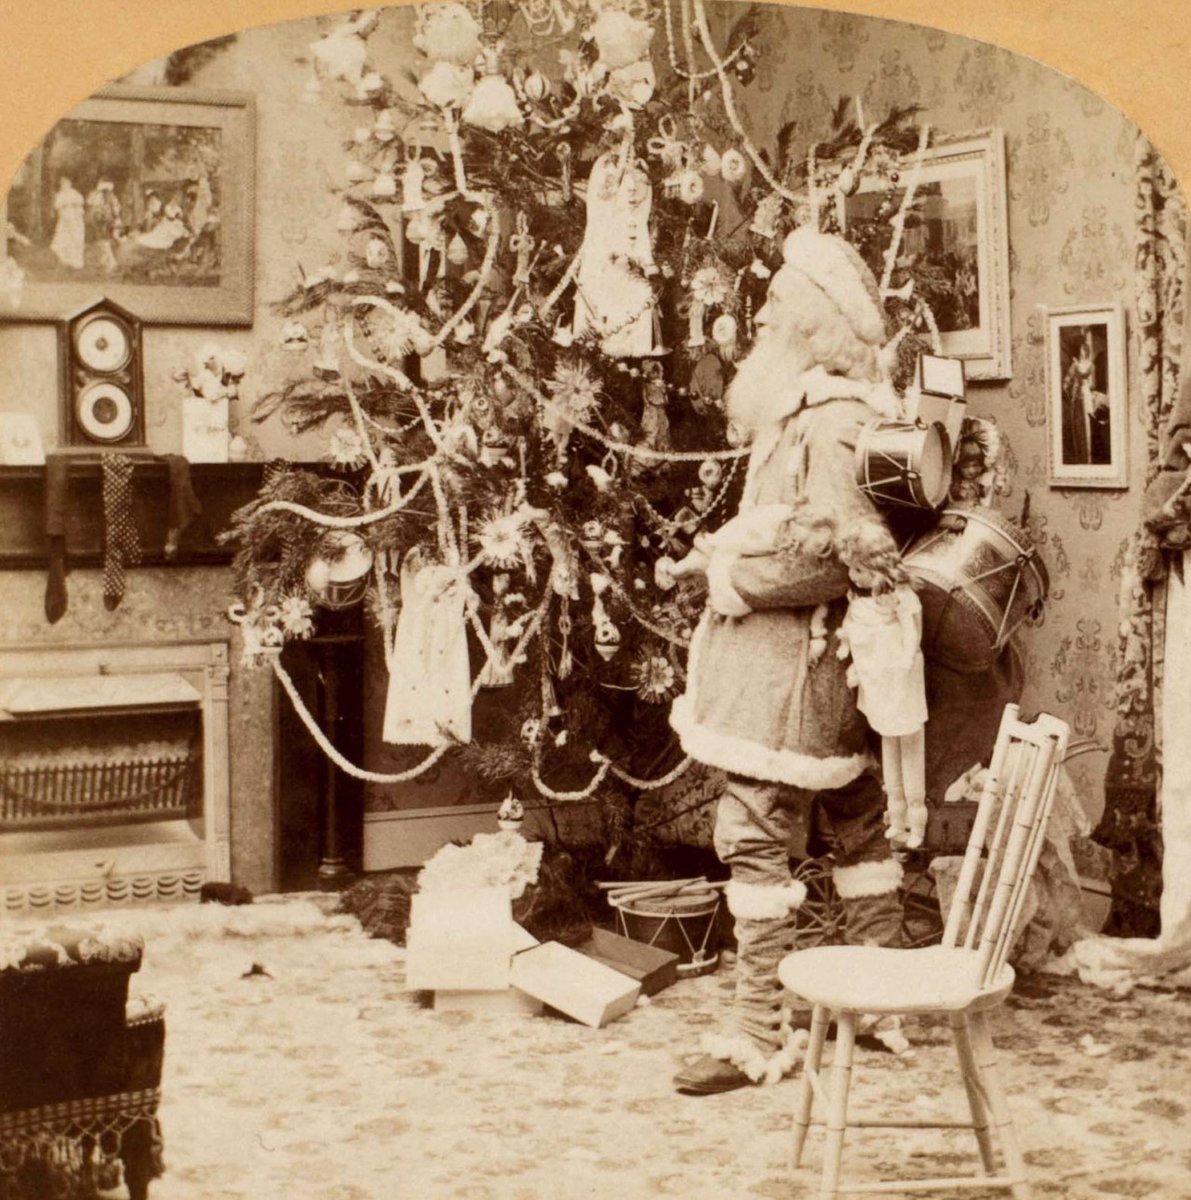 By the end of the century, Christmas had become the biggest annual celebration in the British calendar.